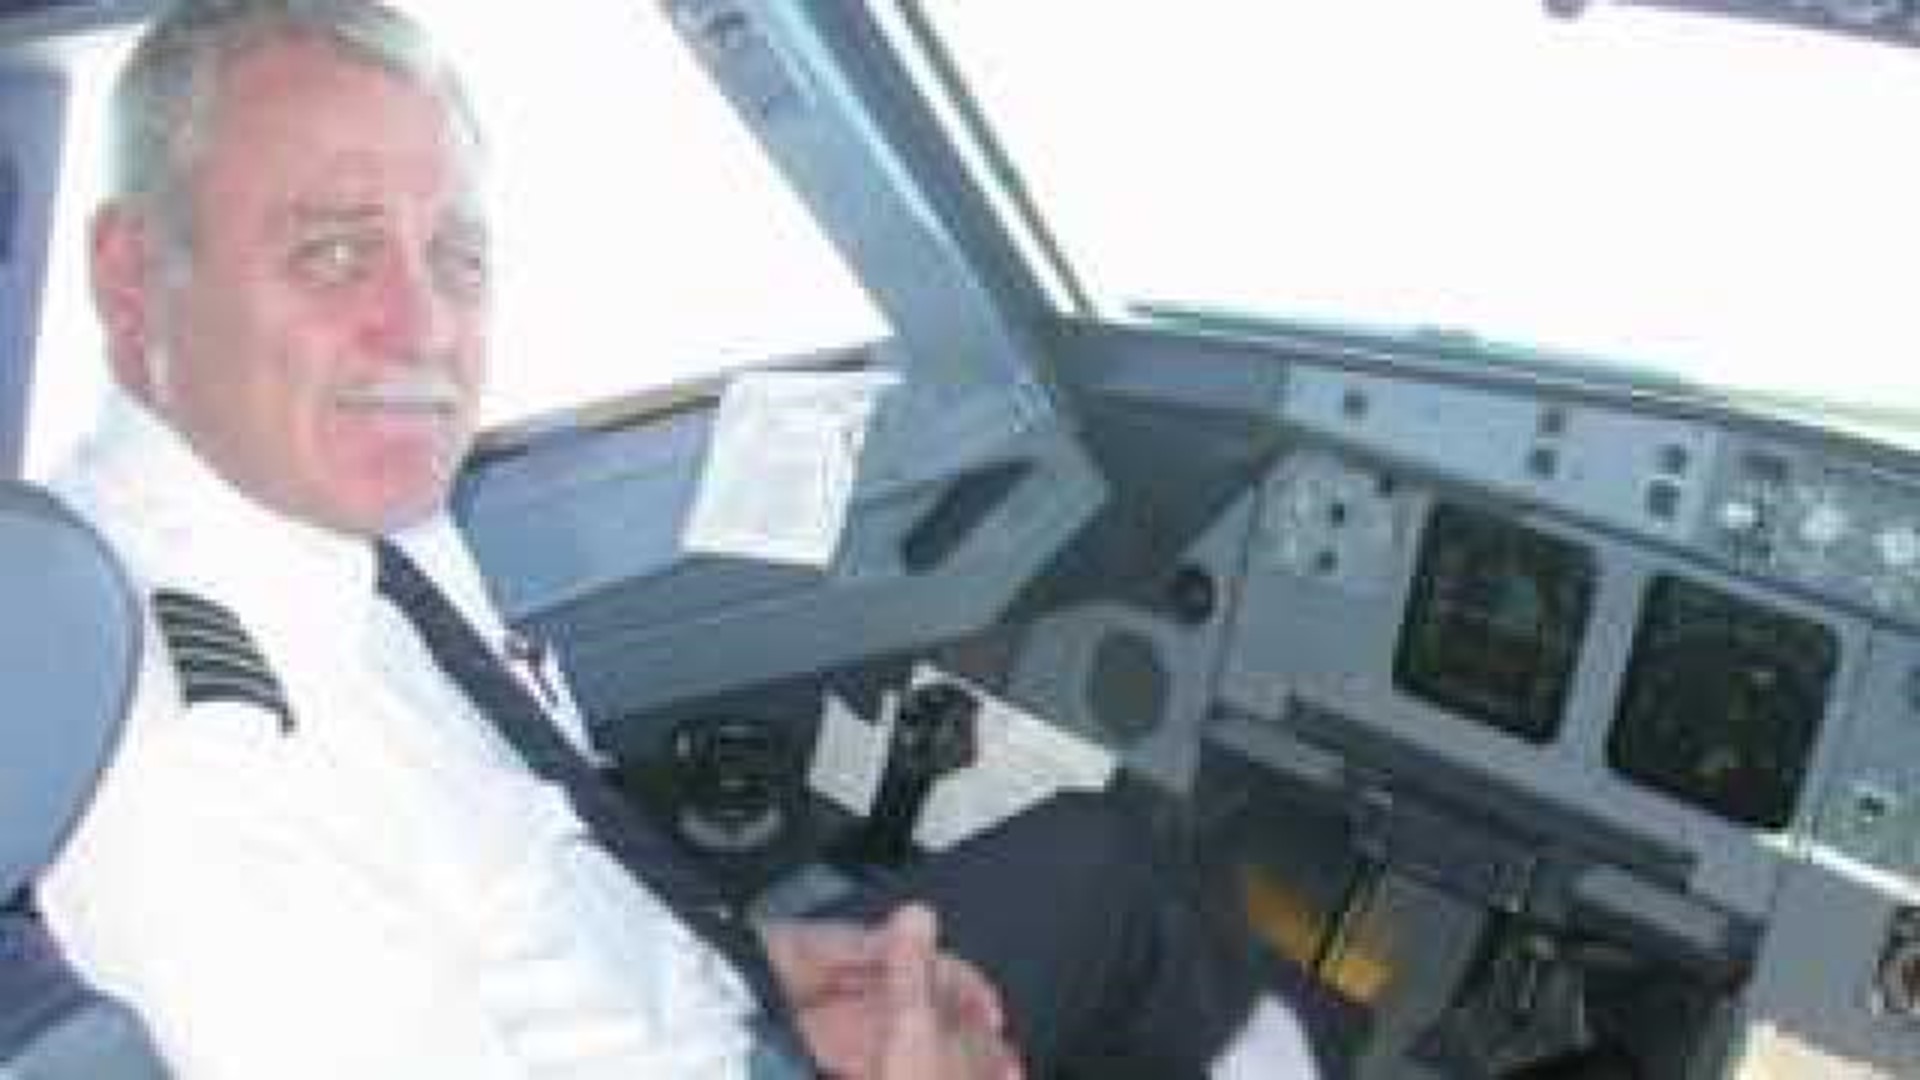 Local pilot shares perspective on Malaysia flight tragedy